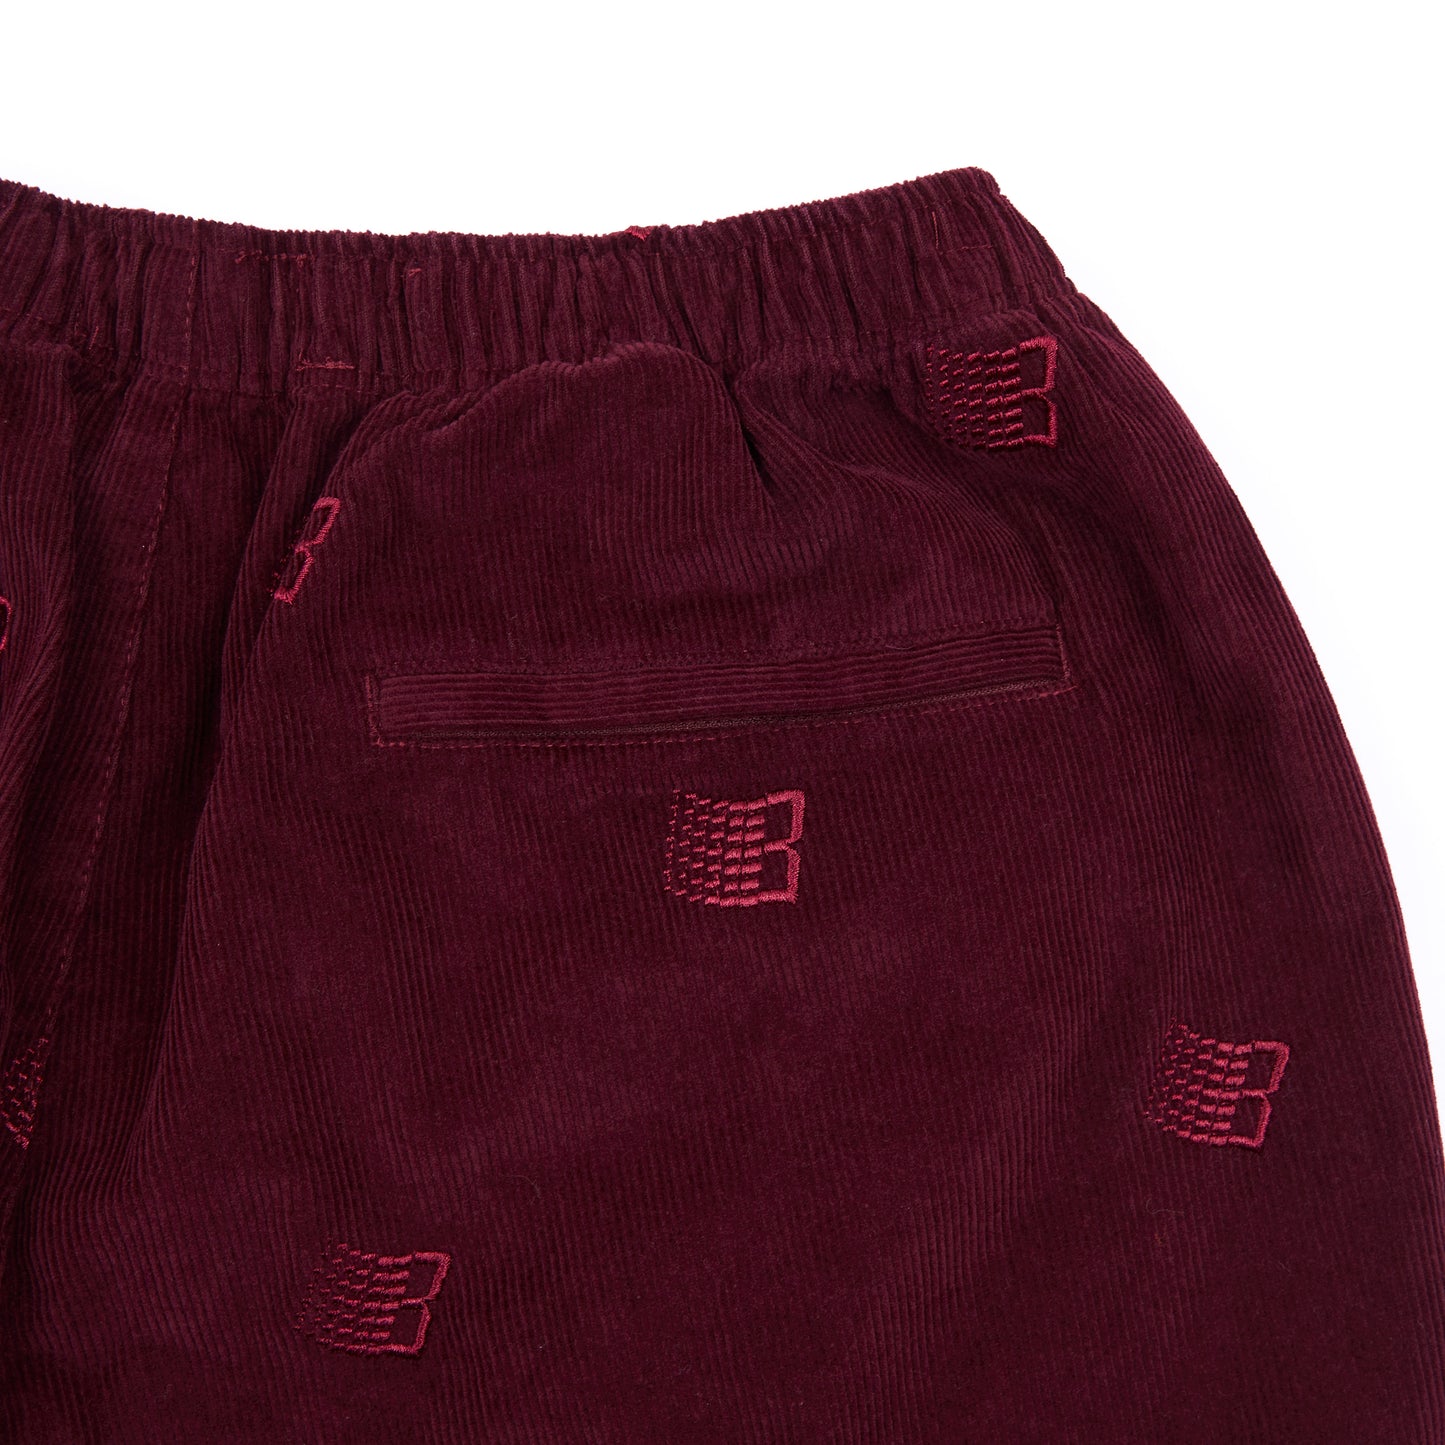 EMBROIDERED SYNCH CORDS MAROON